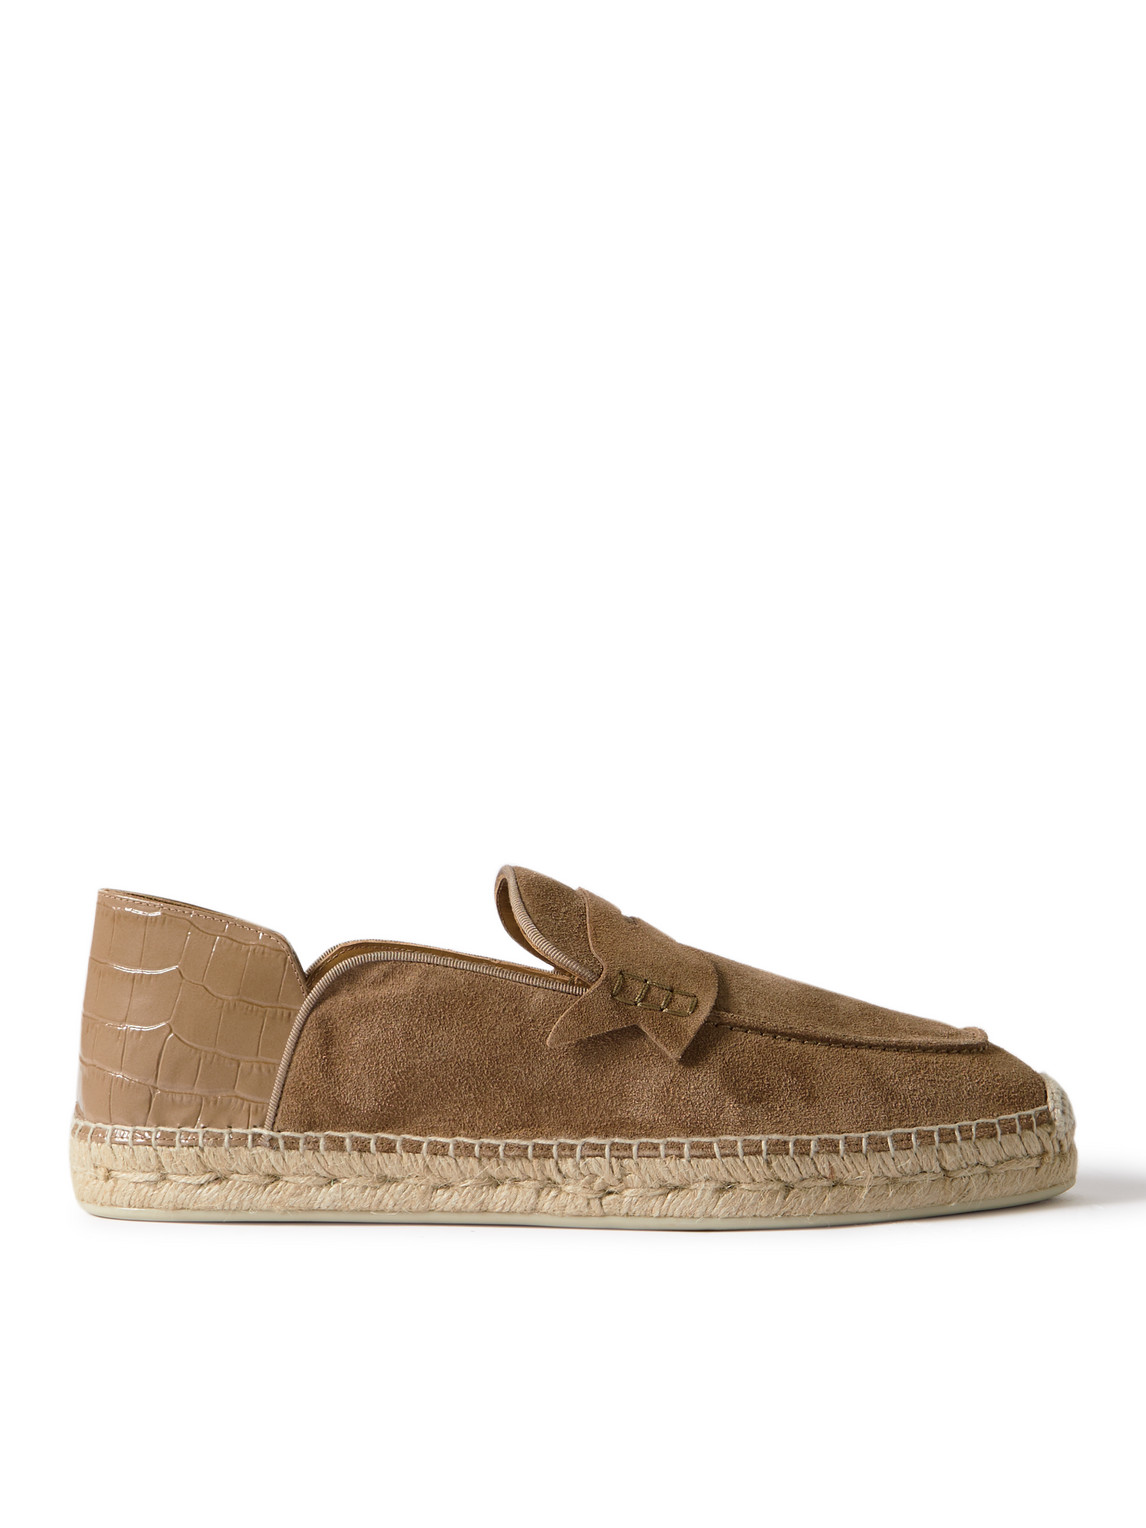 Christian Louboutin Paquepapa Collapsible-heel Croc-effect Leather-trimmed Suede Espadrilles In Brown